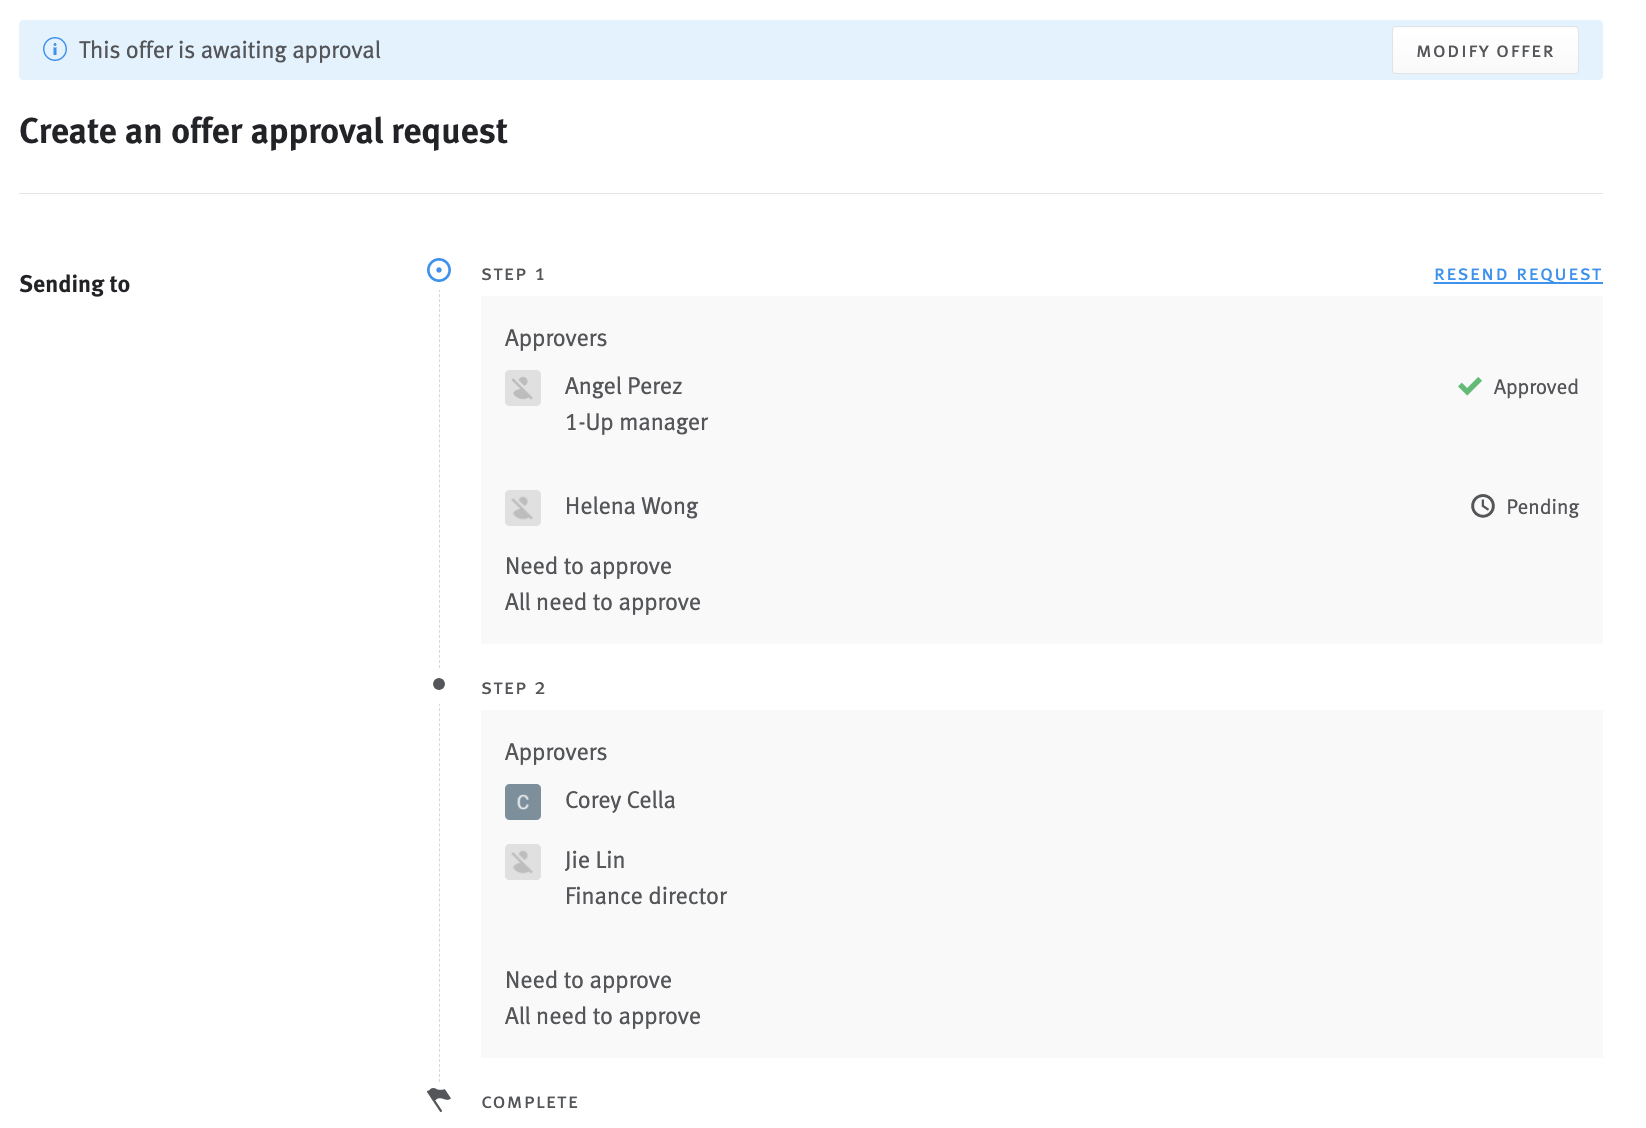 Multi-step offer approval chain shown in offer approval modal with one approval granted and one approval pending. Banner is shown at top of the modal containing a Modify Offer button.